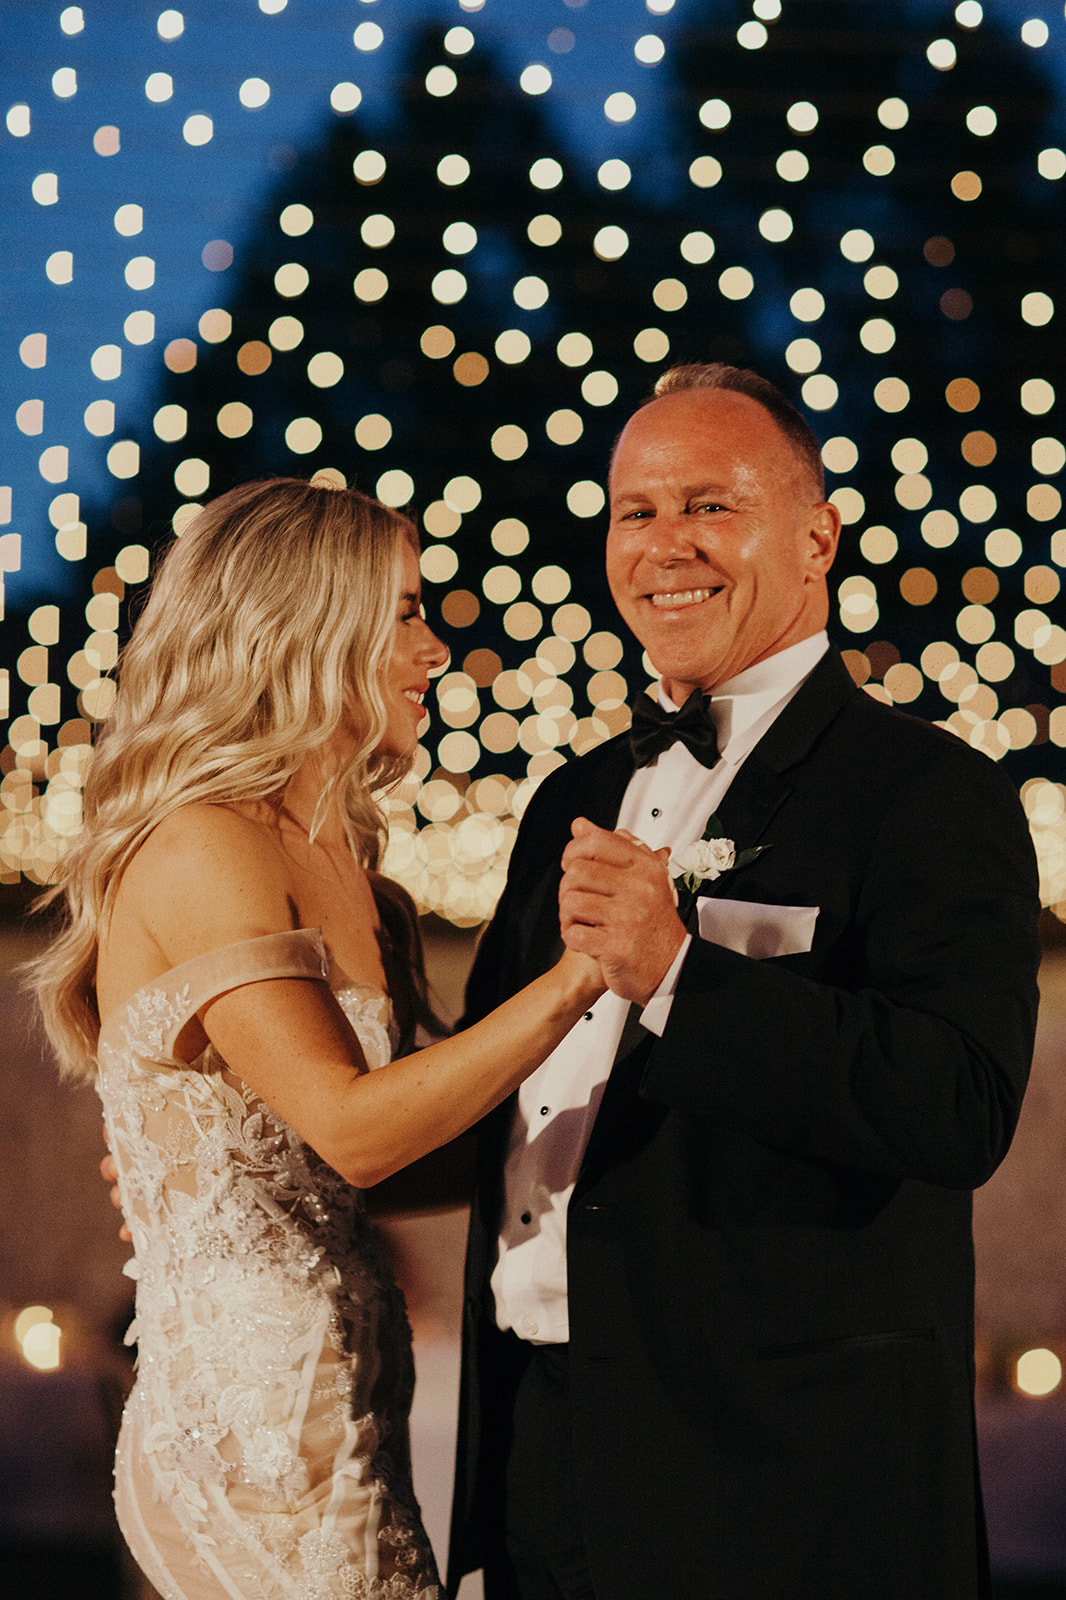 Dazzling lights for father daughter dance